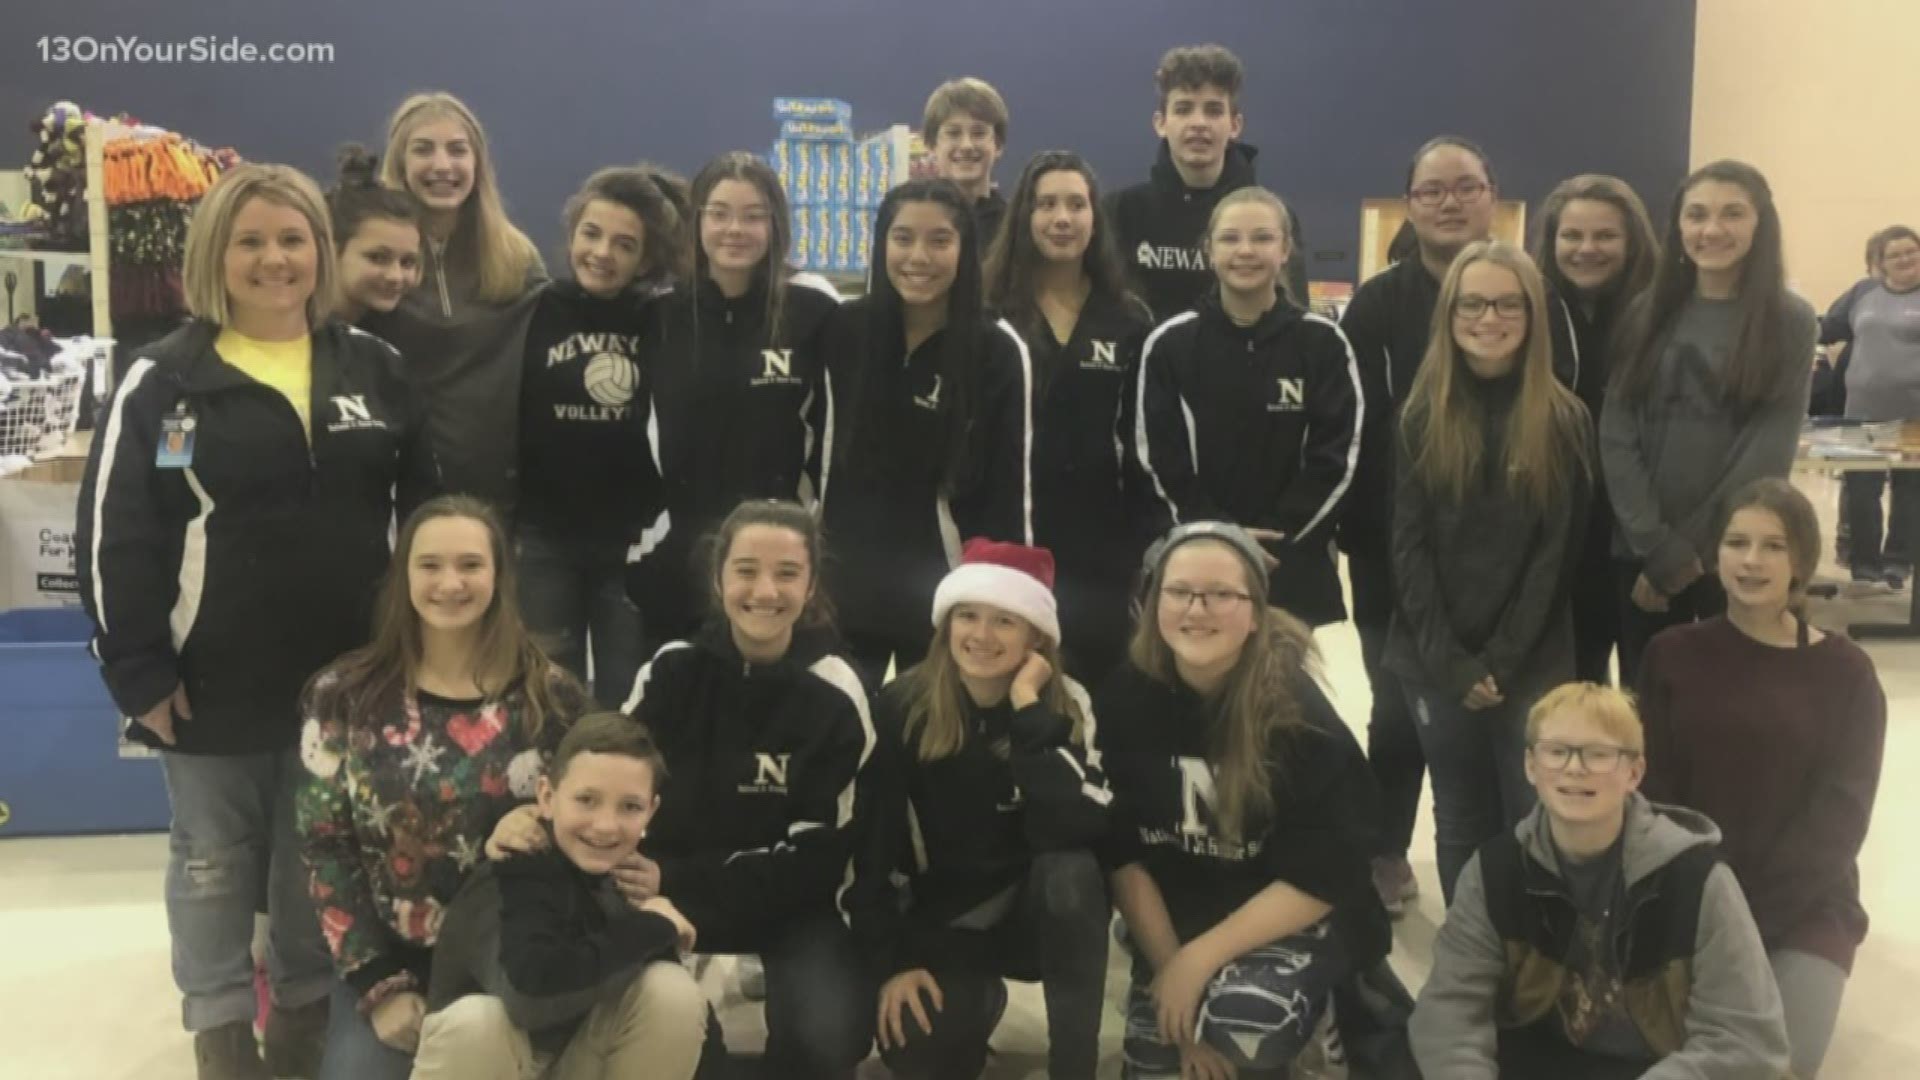 Students from Newaygo Middle School donated tons of toys to Toys for Tots so that area children who wouldn't otherwise be opening presents this year could!